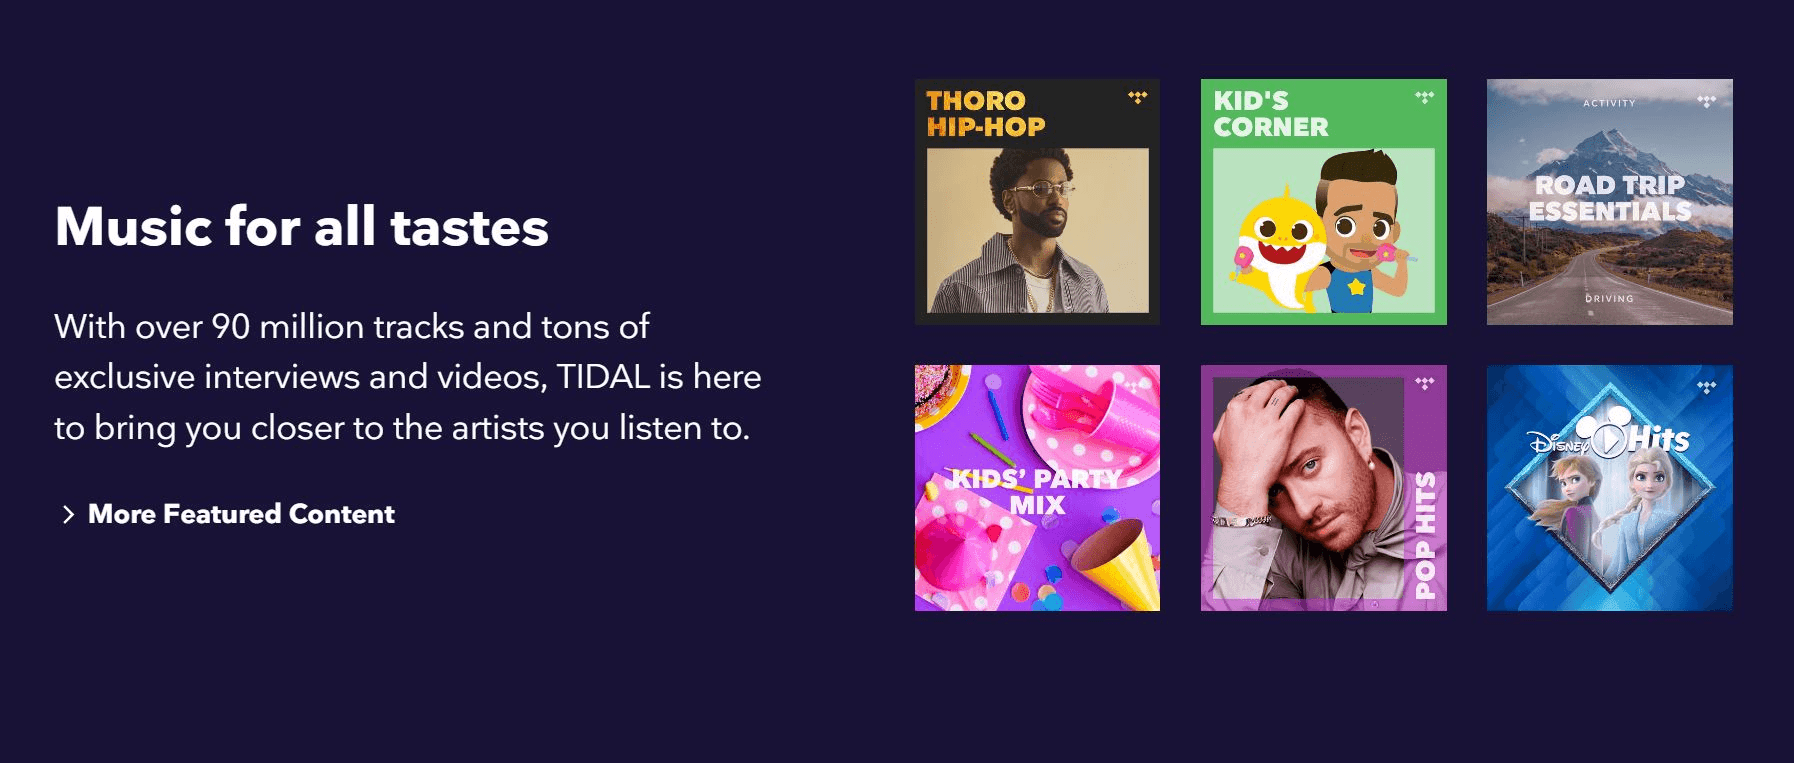 Tidal music options include music for all tastes. 